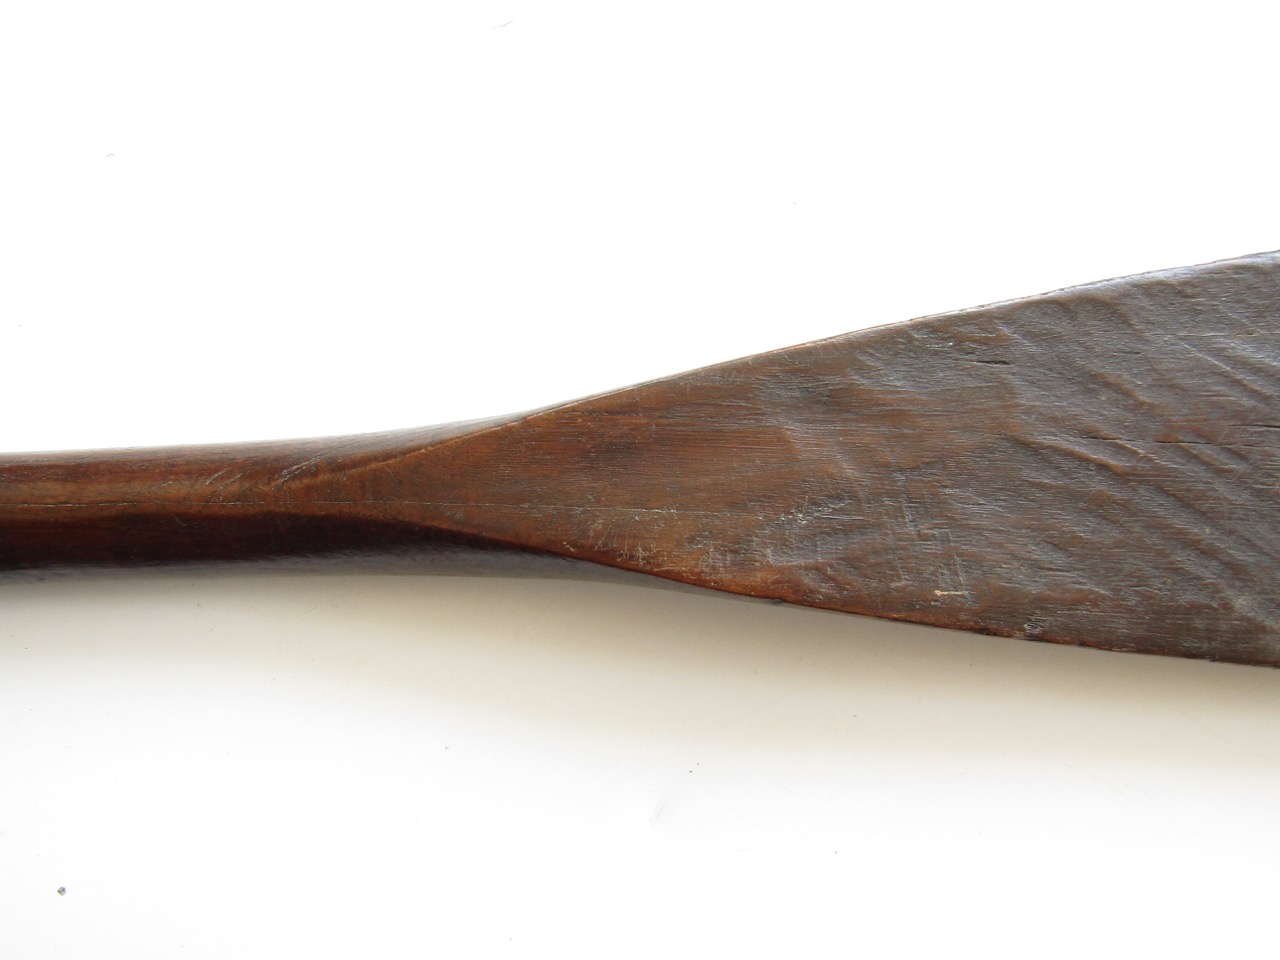 An antique Maori hoe / paddle, having an offset palmate blade and cylindrical pommel, 158 cm - Image 2 of 3